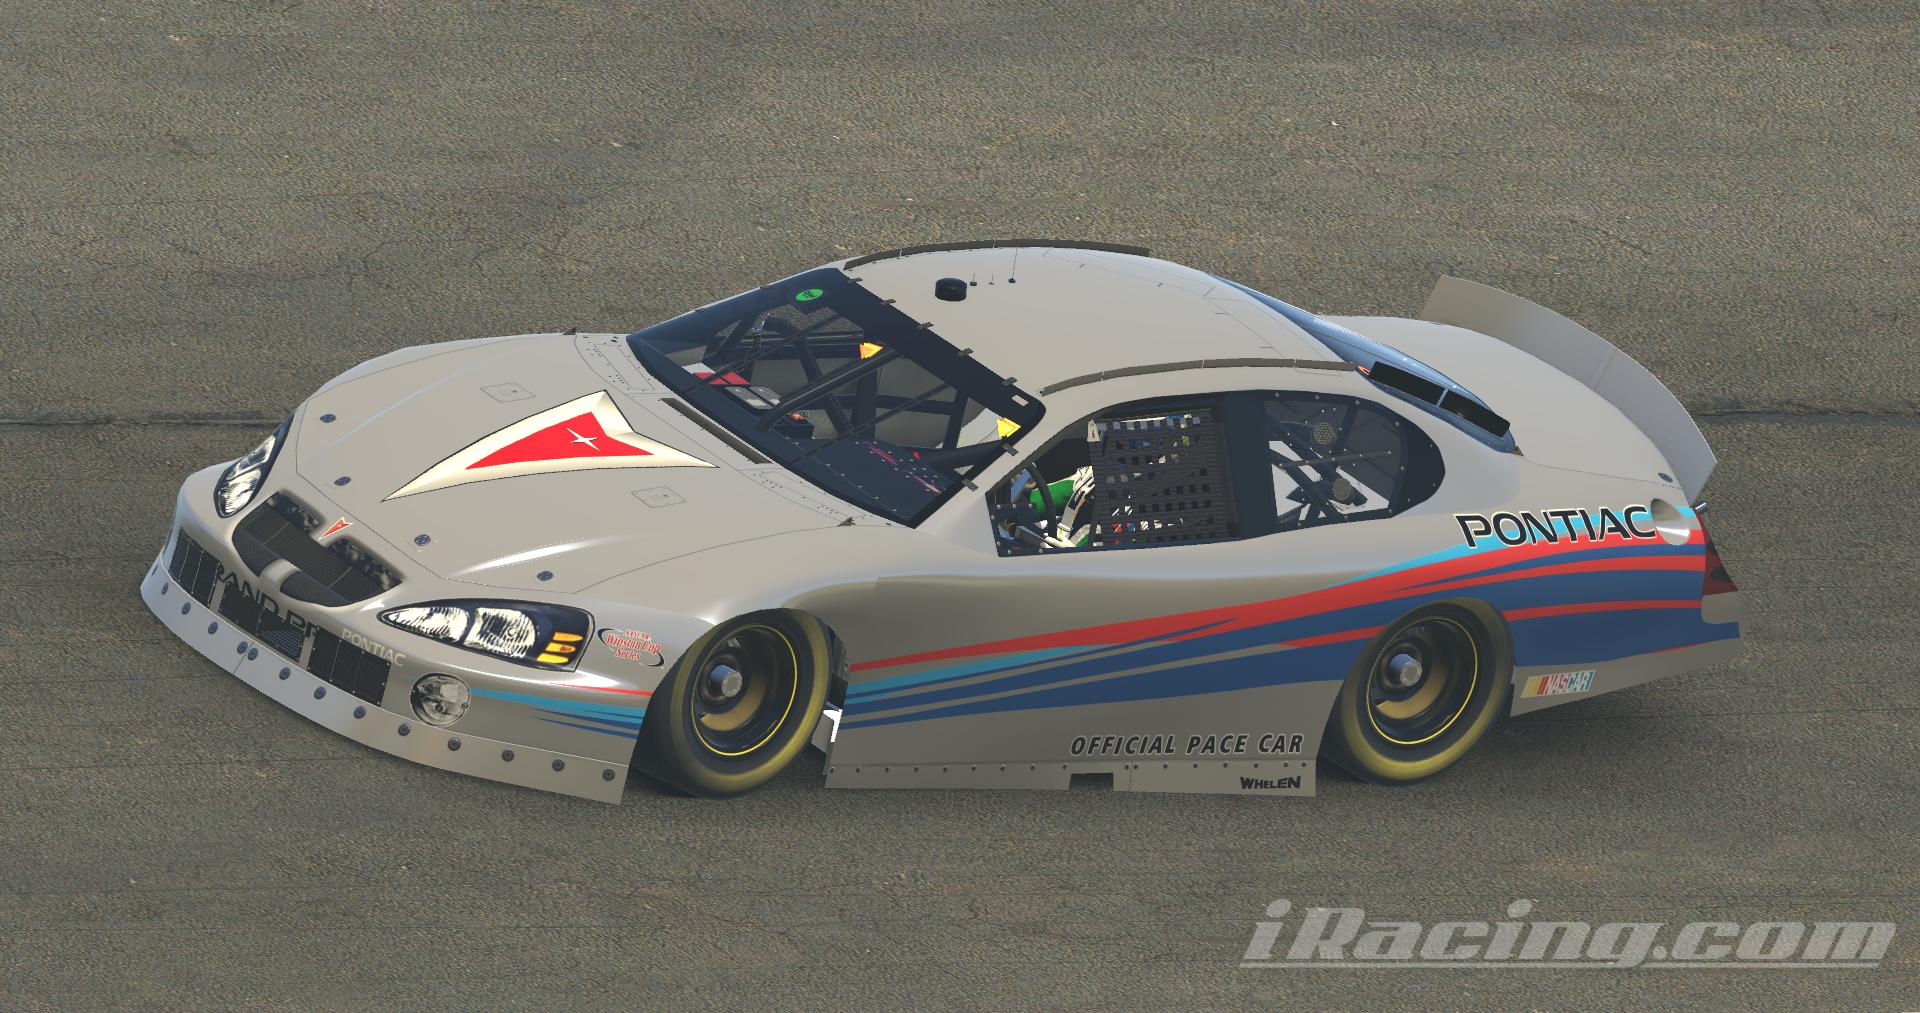 Preview of 2003 Pontiac Grand Prix NASCAR Winston Cup Pace Car by Aly Osman